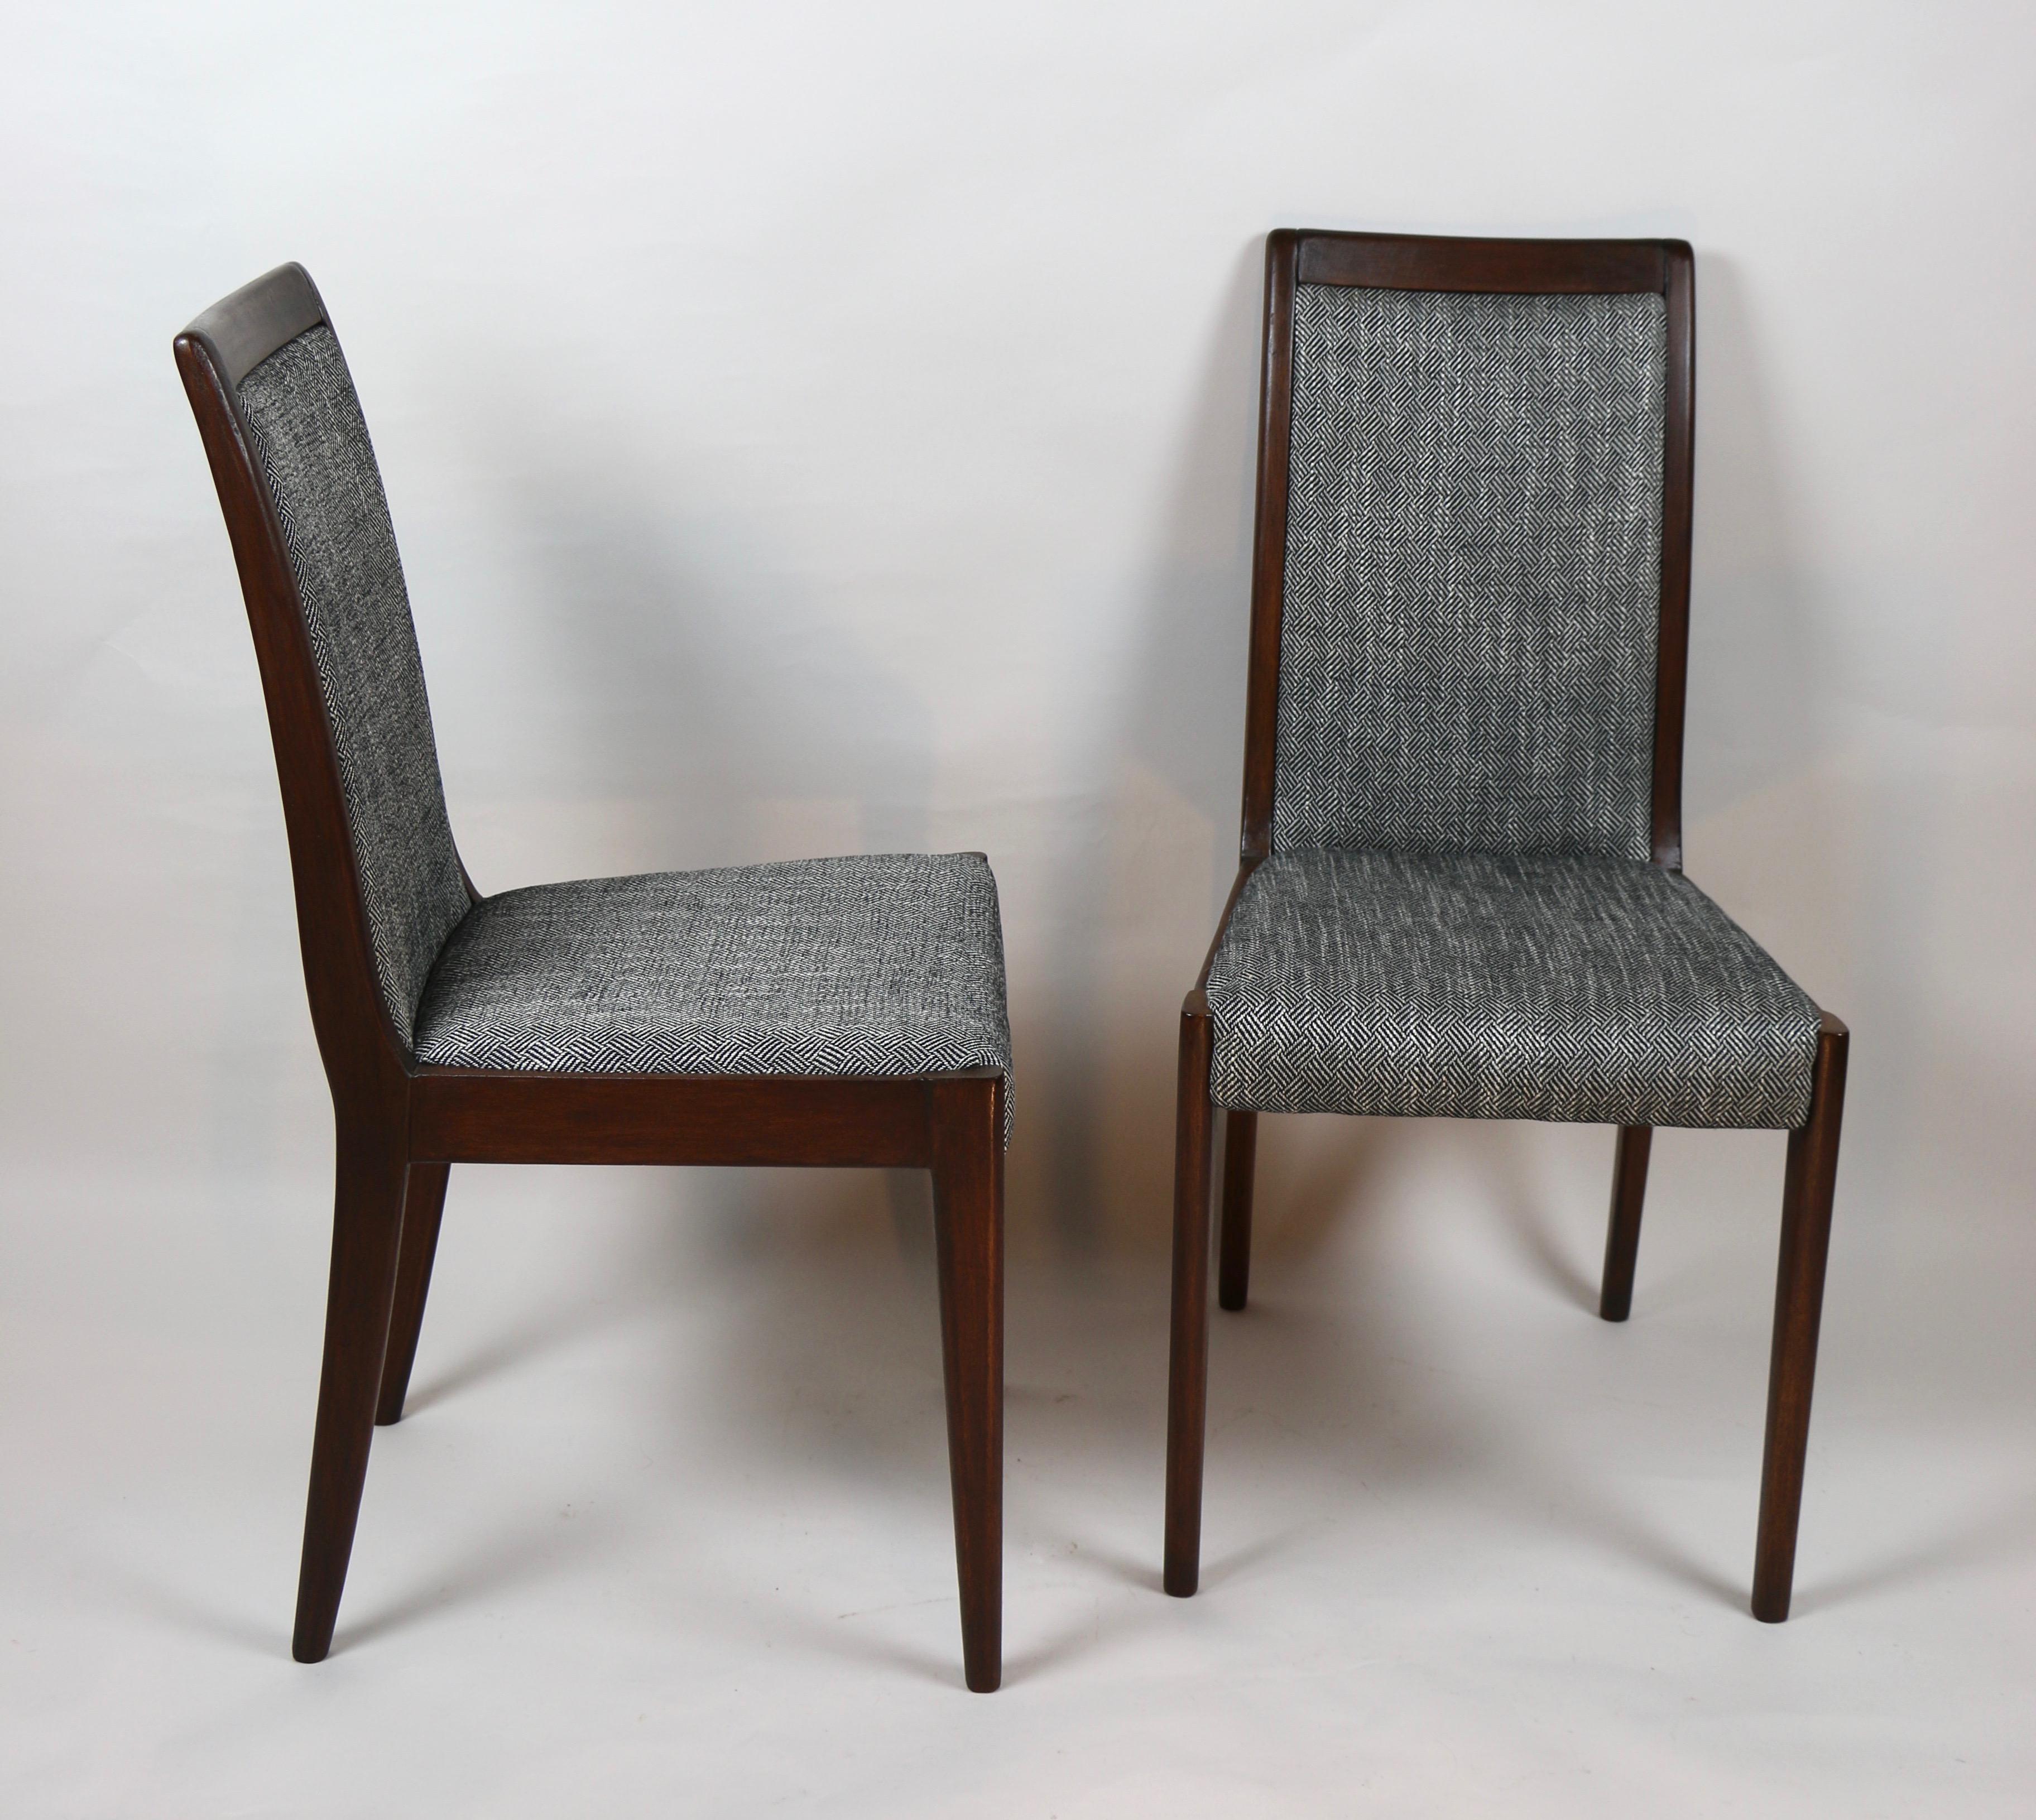 German Set of 4 Black and White Natural Wood Casala Chairs For Sale